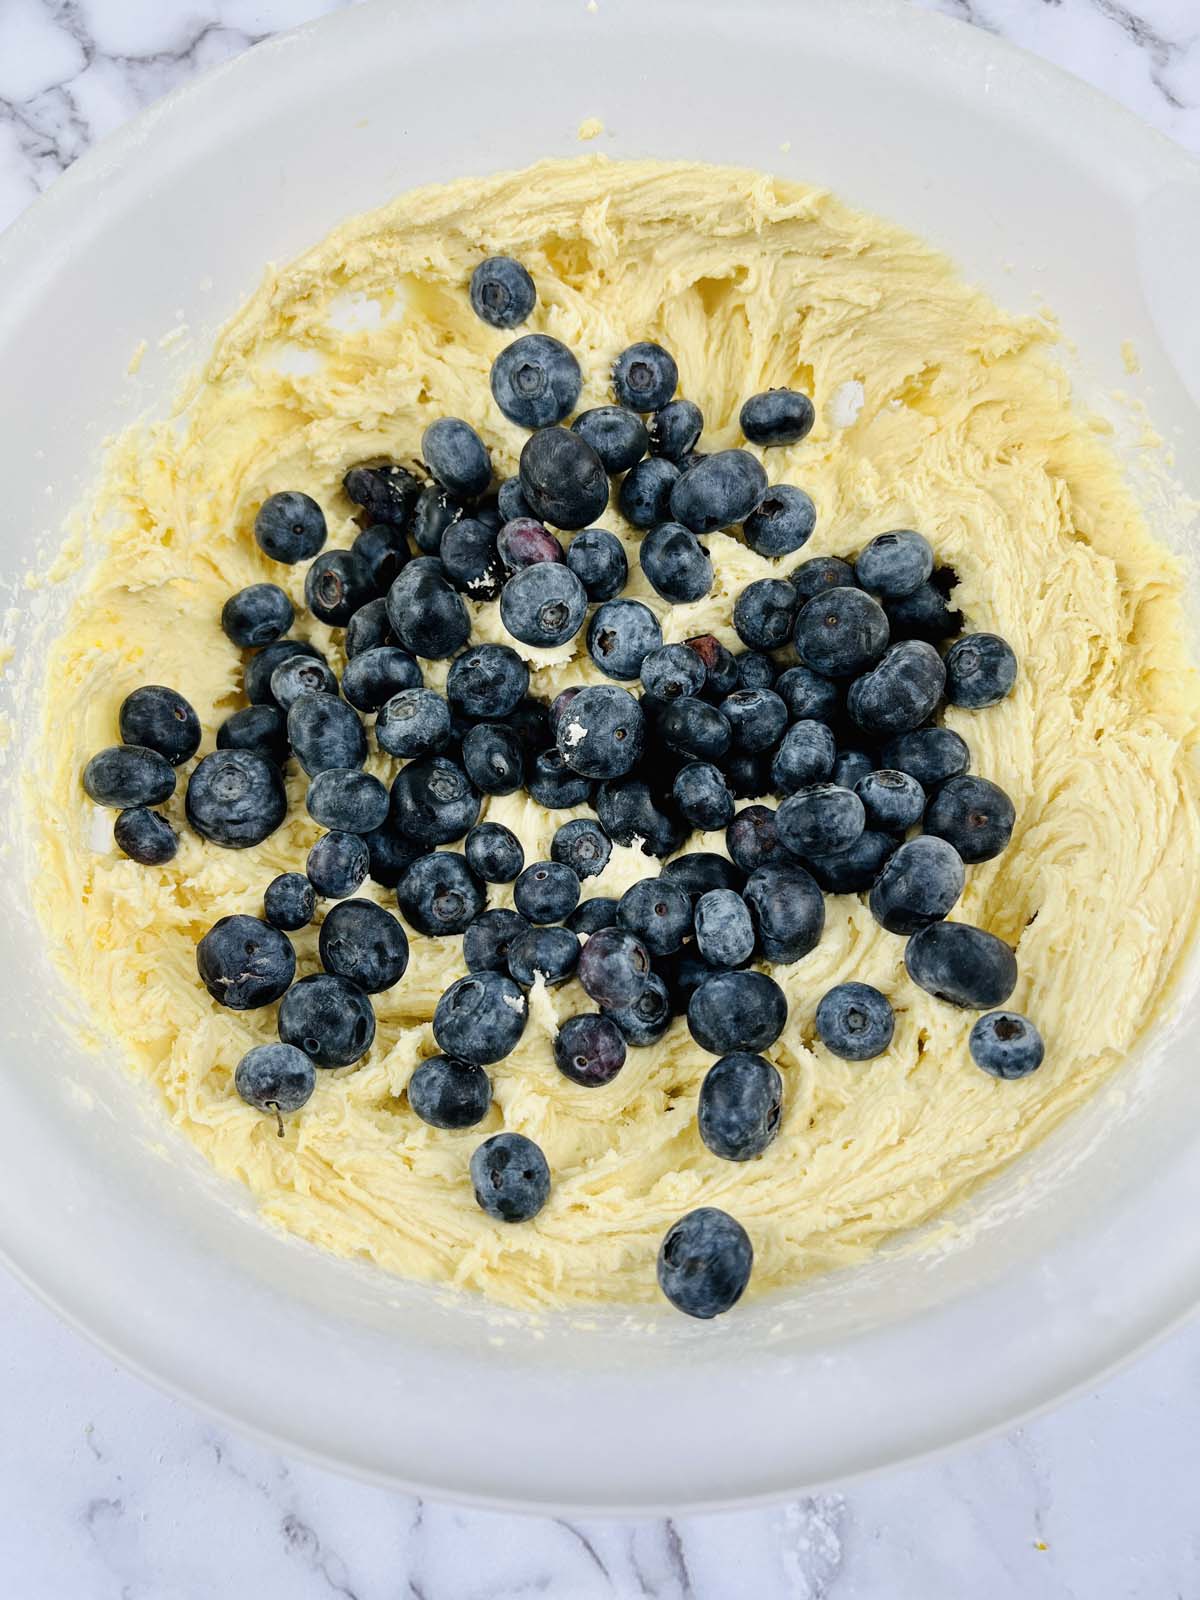 Blueberries on top of cookie dough.